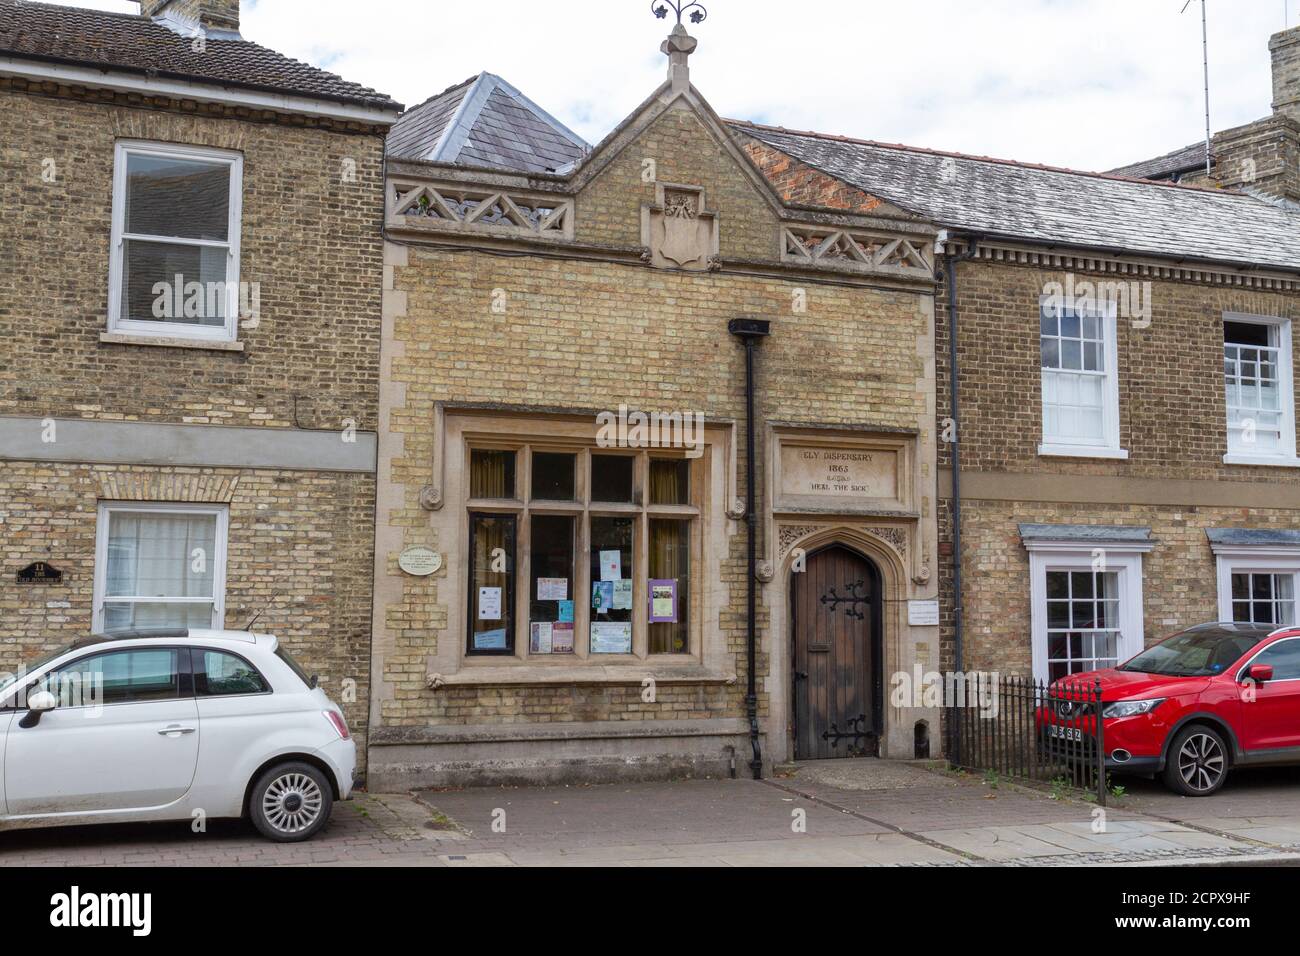 The Ely Dispensary ('Heal the Sick') on St. Mary's Street (1865), in Ely, Cambridgeshire, UK. Stock Photo